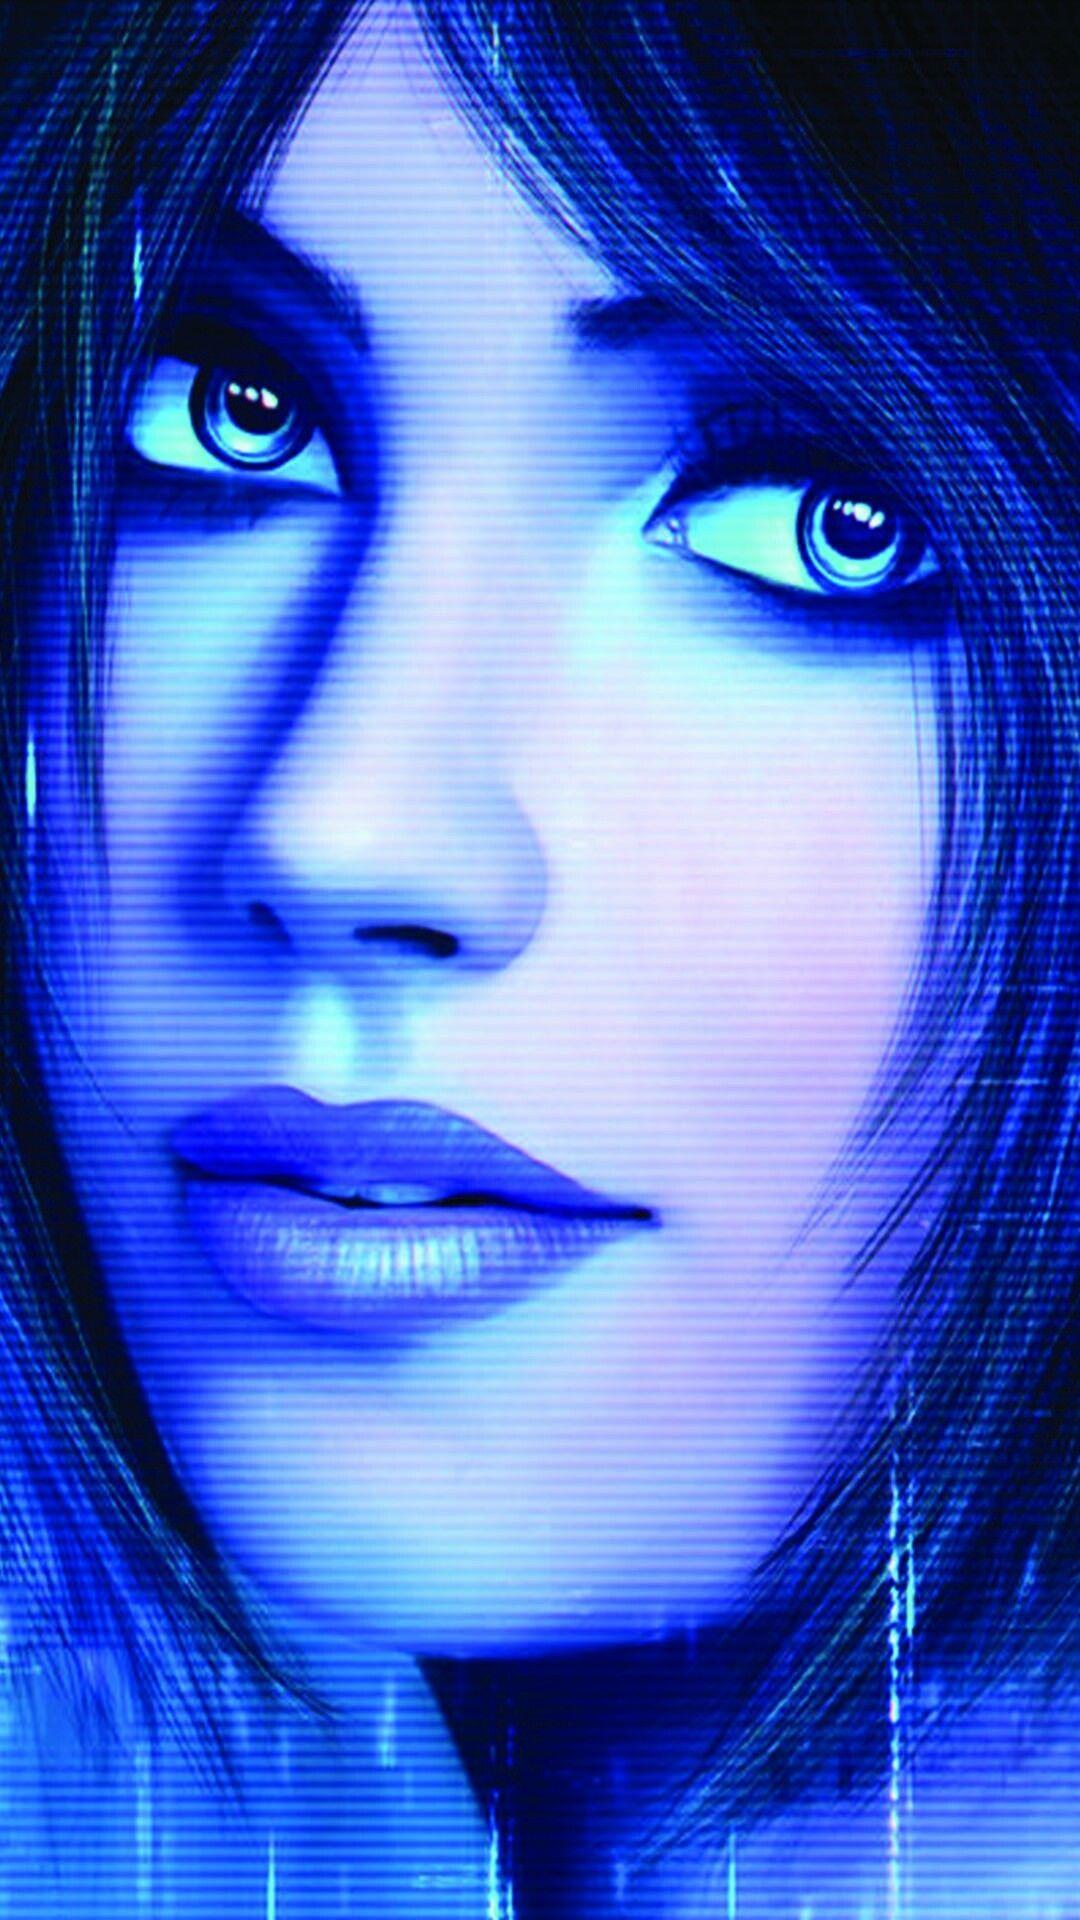 Halo 4 Cortana Wallpaper 75 pictures